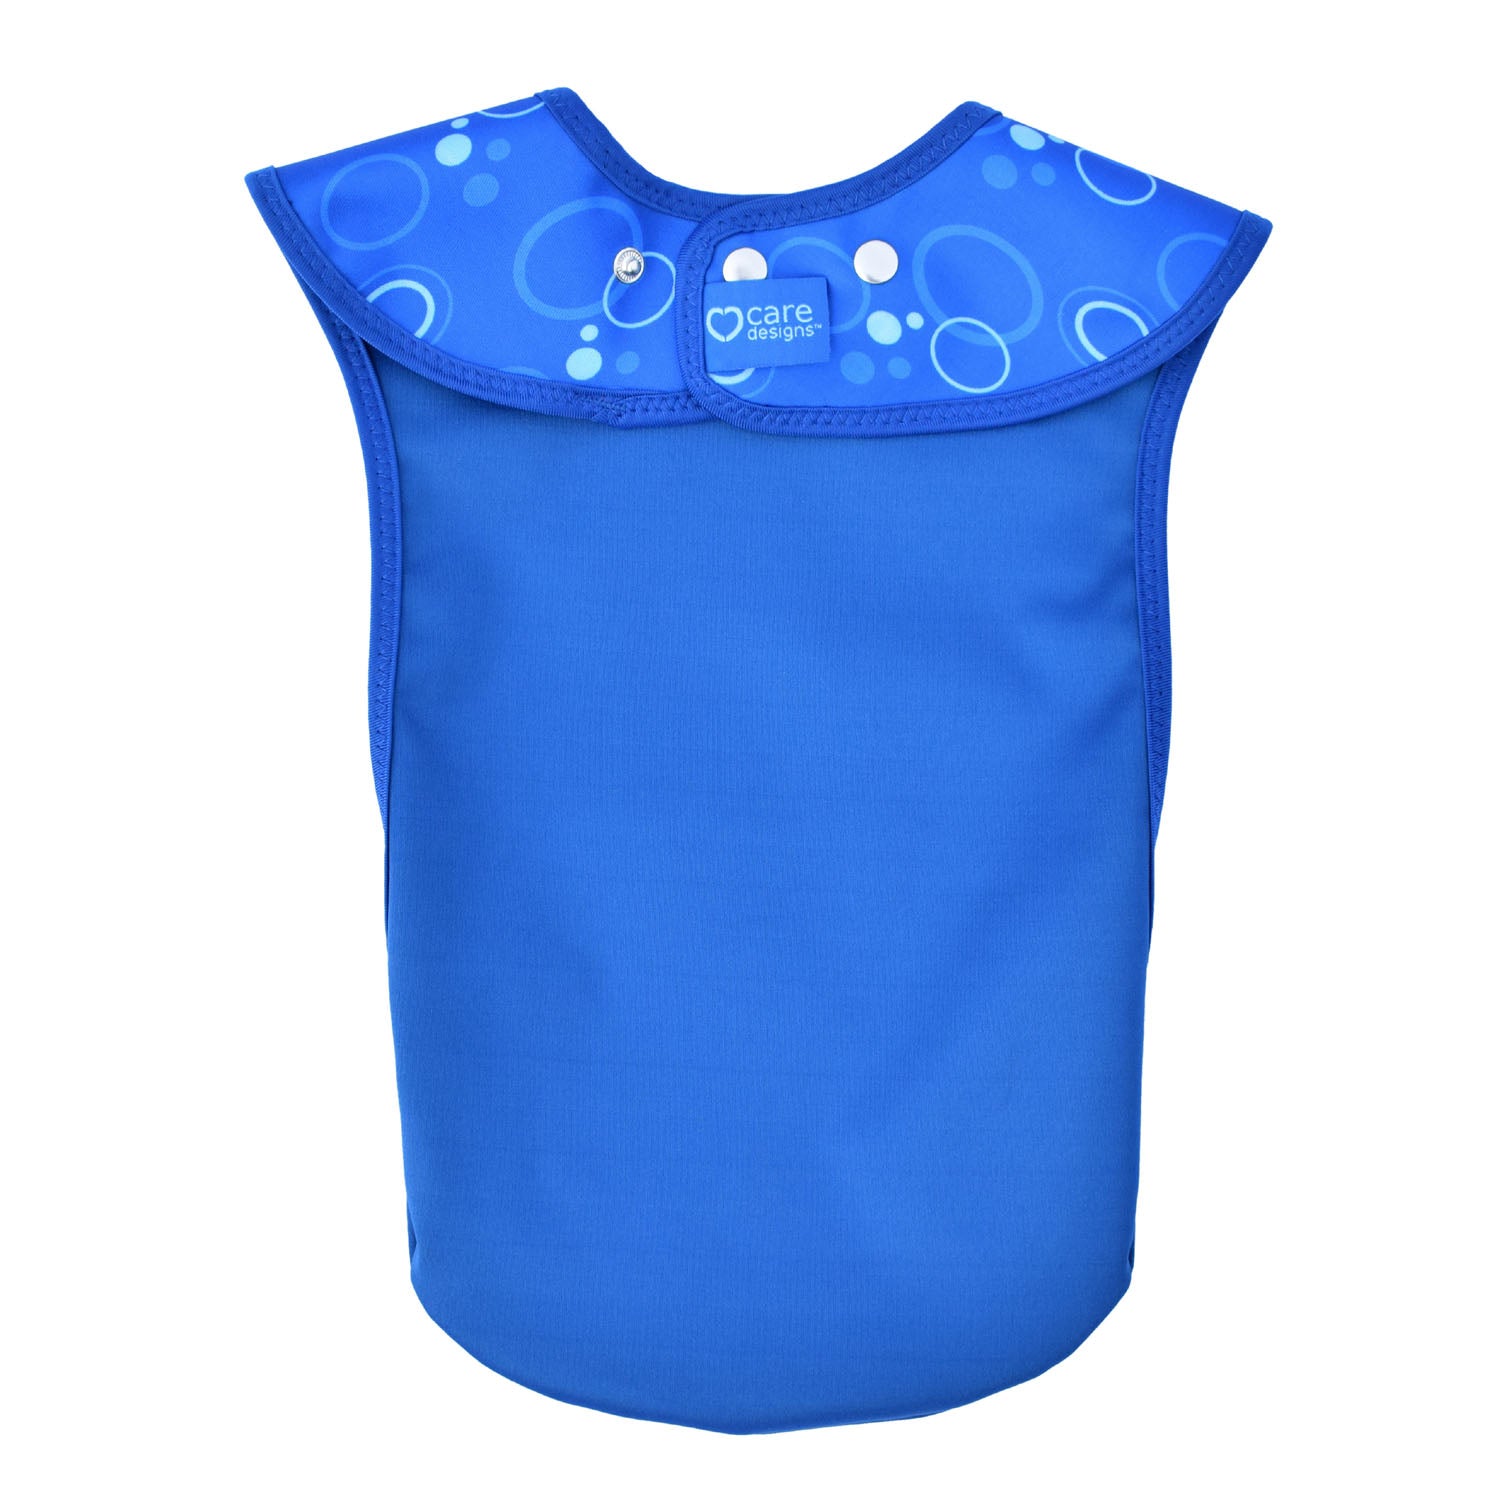 CareDesign_large_tabard_for_toddlers_children_adults_special_needs_comfortable_dribble_bib_blue_back